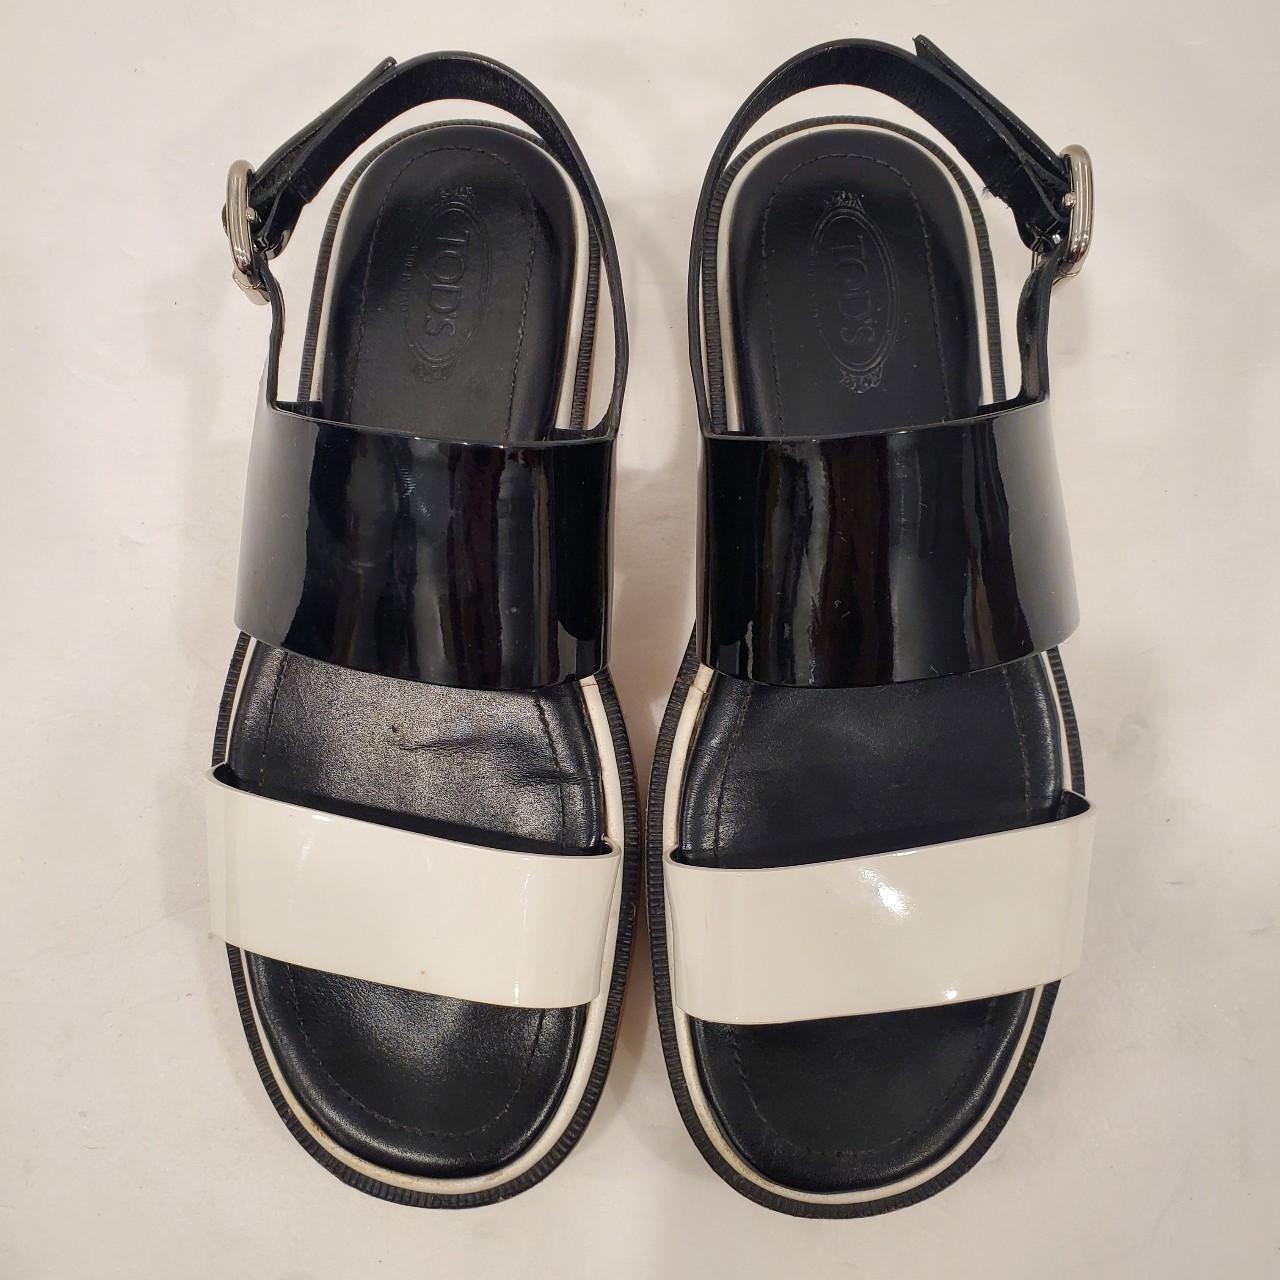 Tods Women's Black and White Sandals | Depop